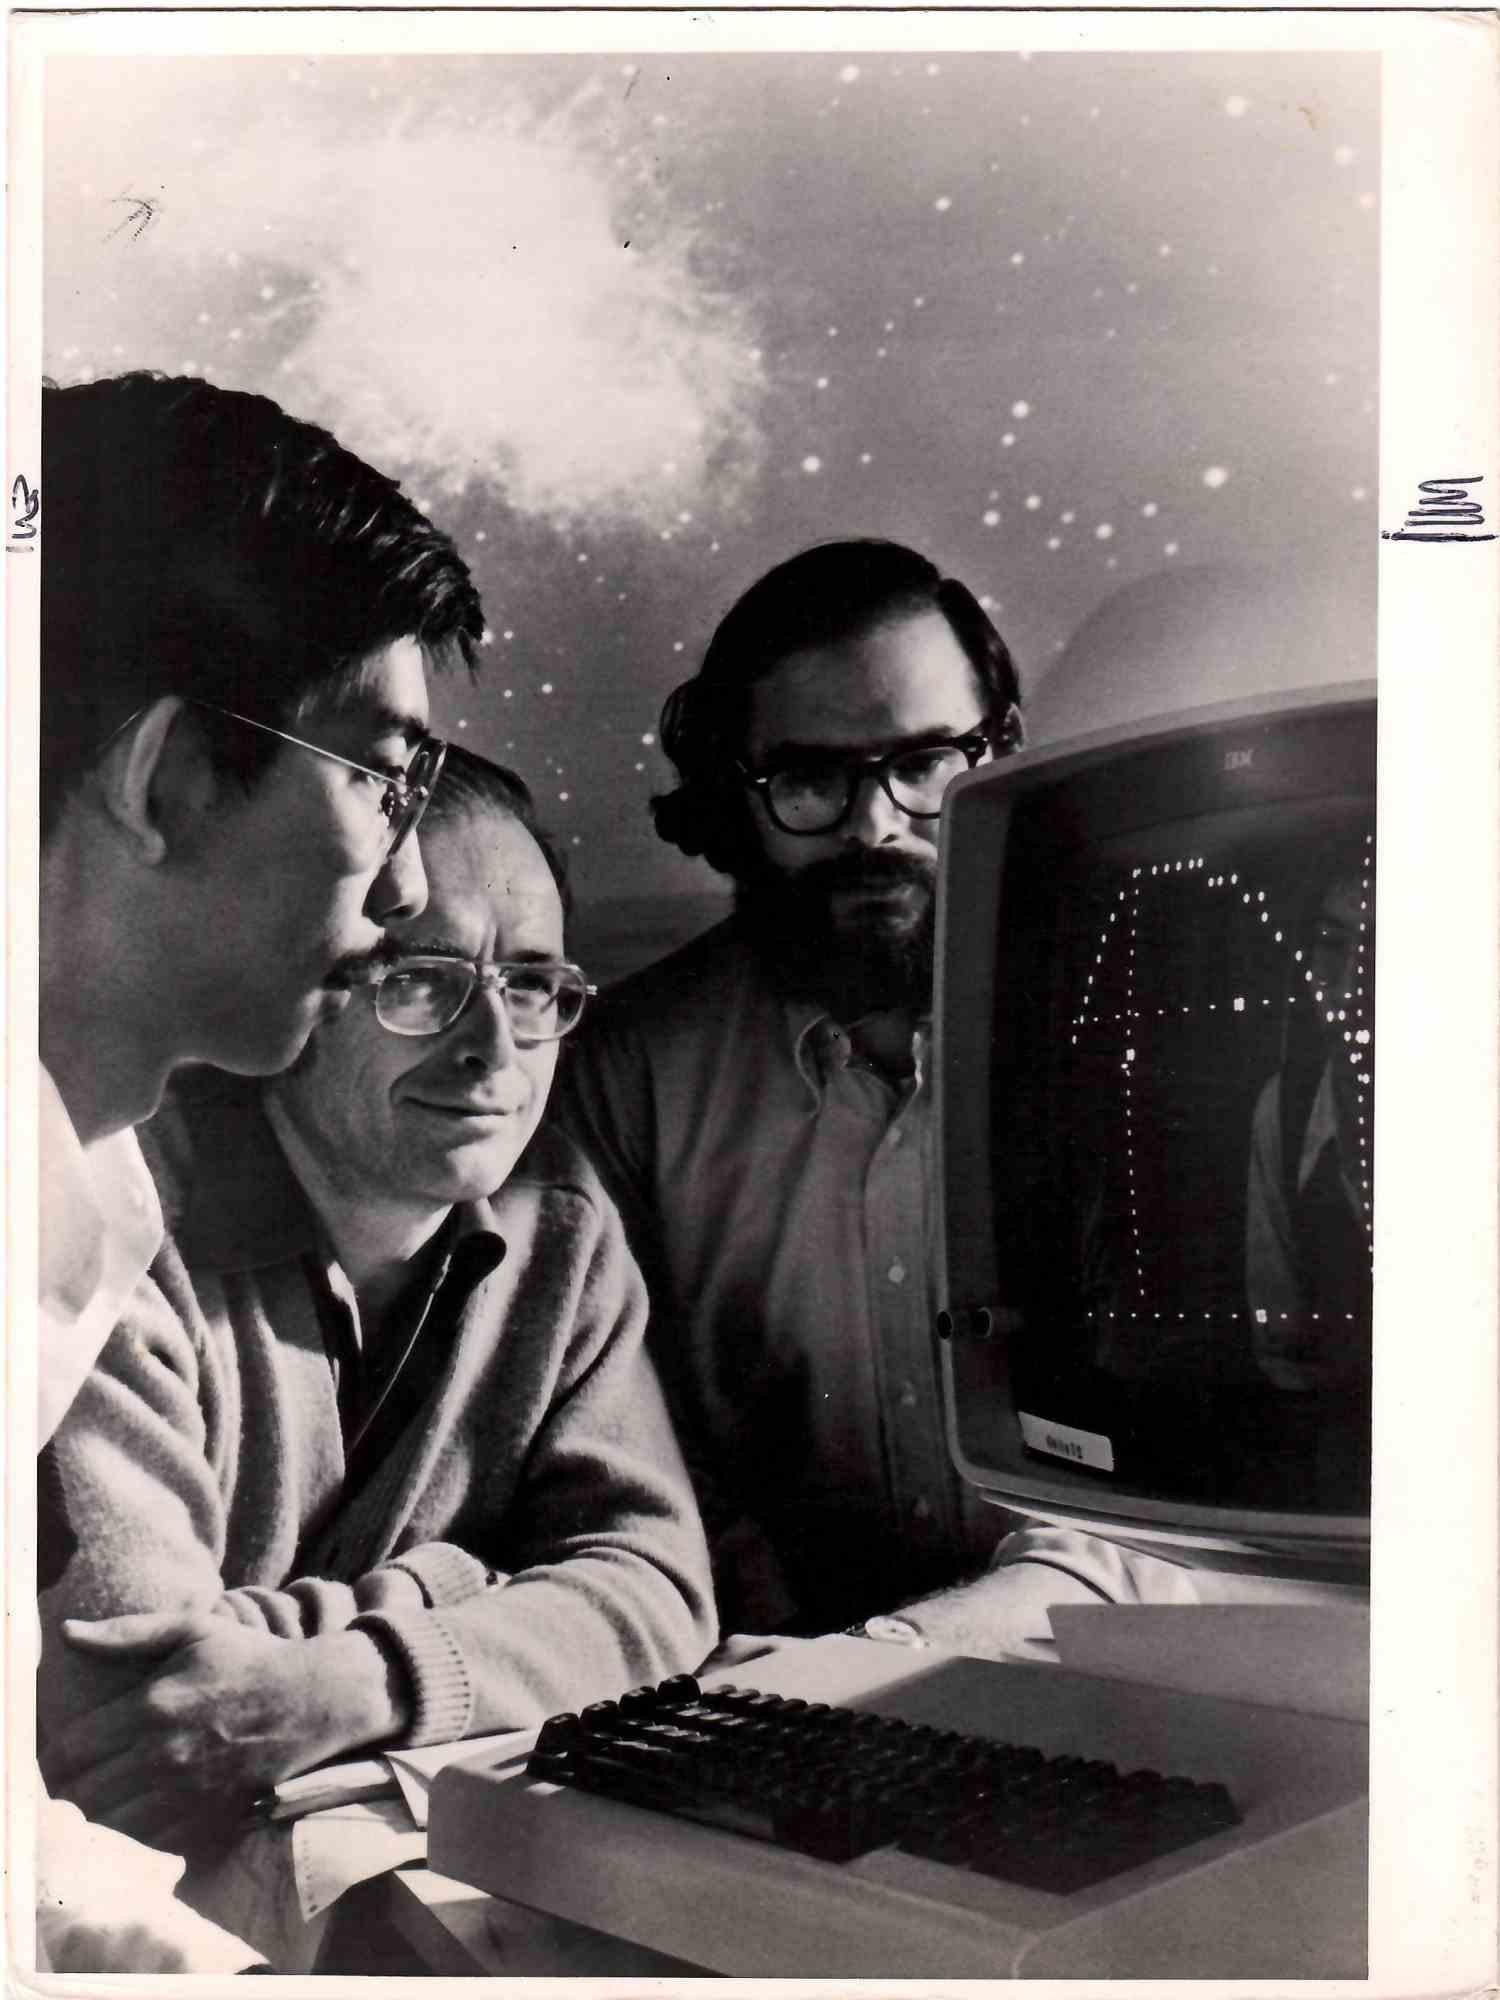 Unknown Black and White Photograph - Scientists in 1960s - Vintage B/W photo